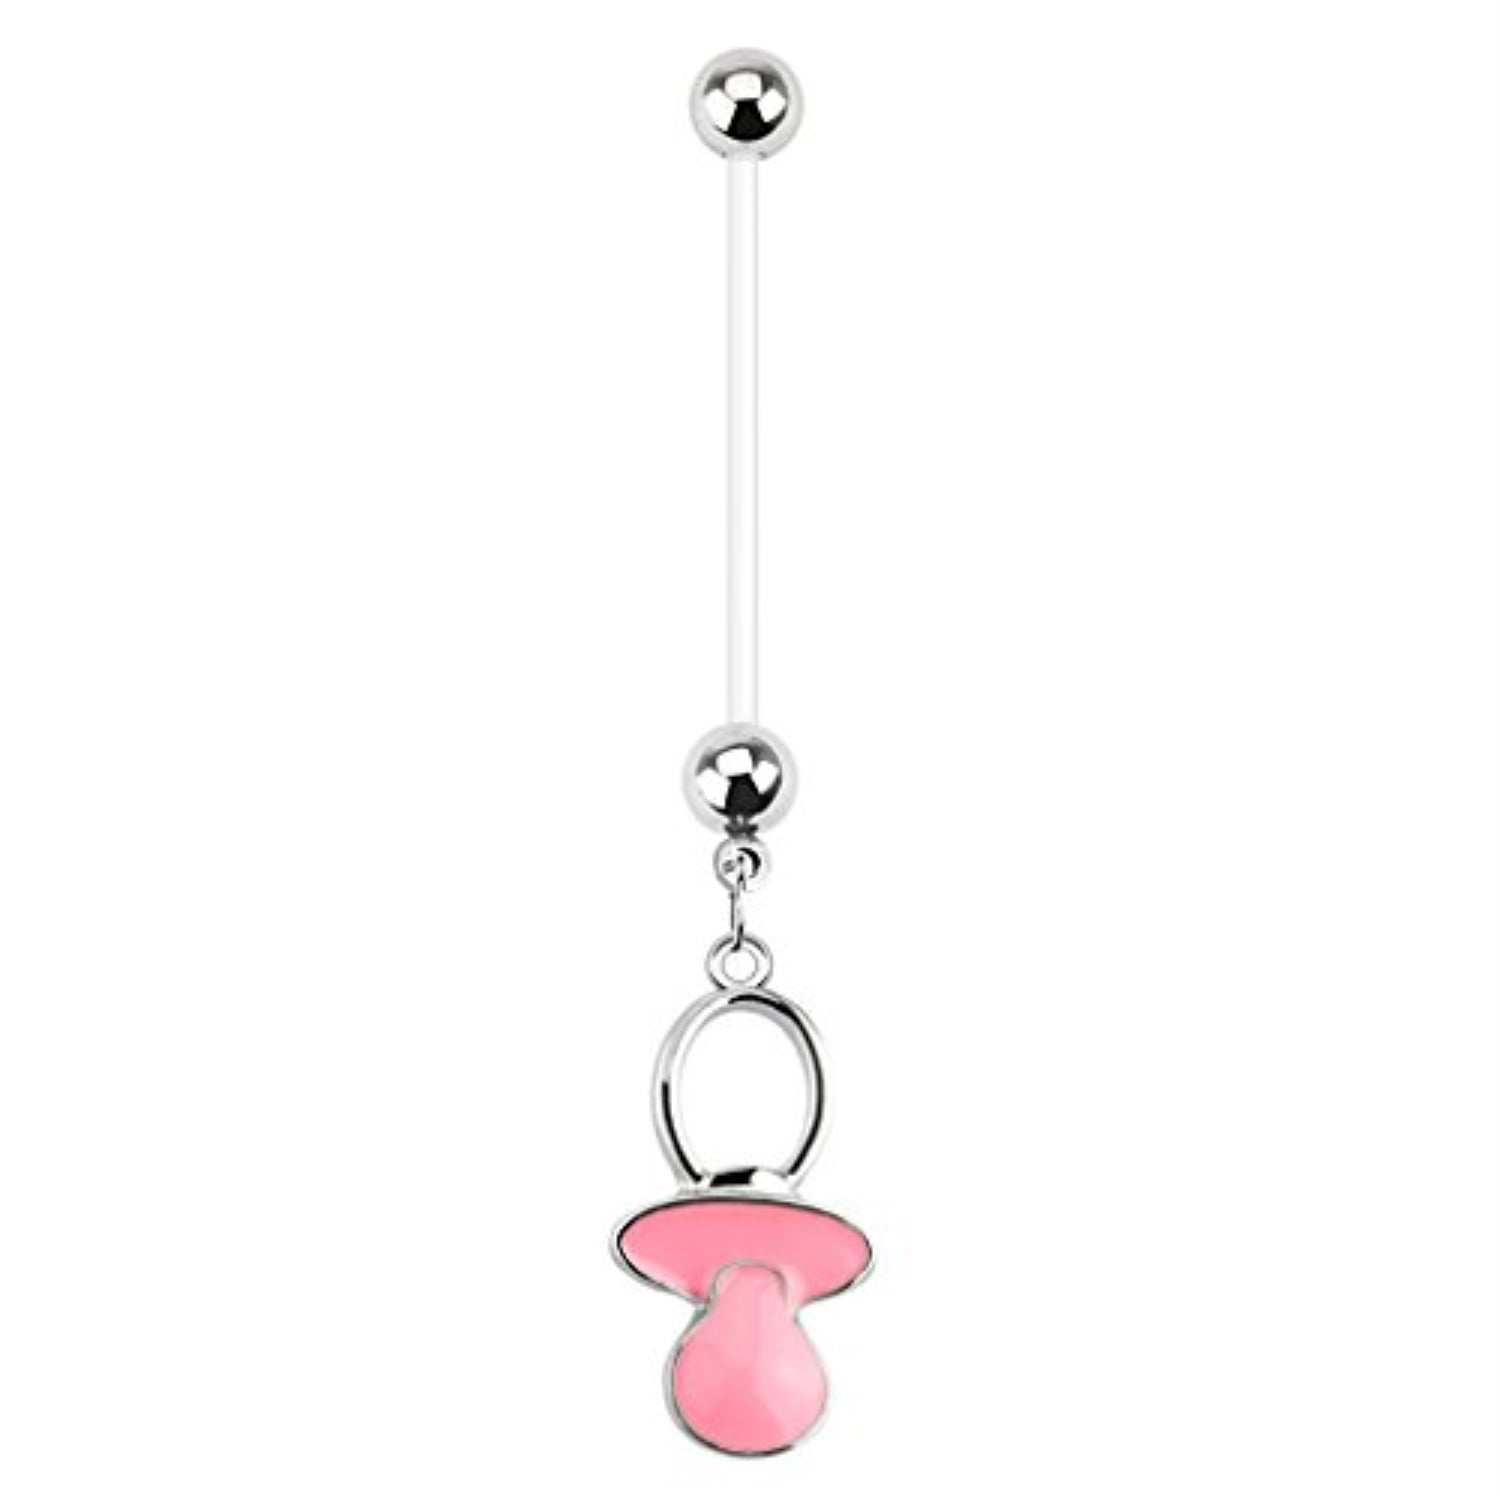 Pacifier Pregnancy Belly Button Ring 14g 1" Inch 26 mm Blue Or Pink 